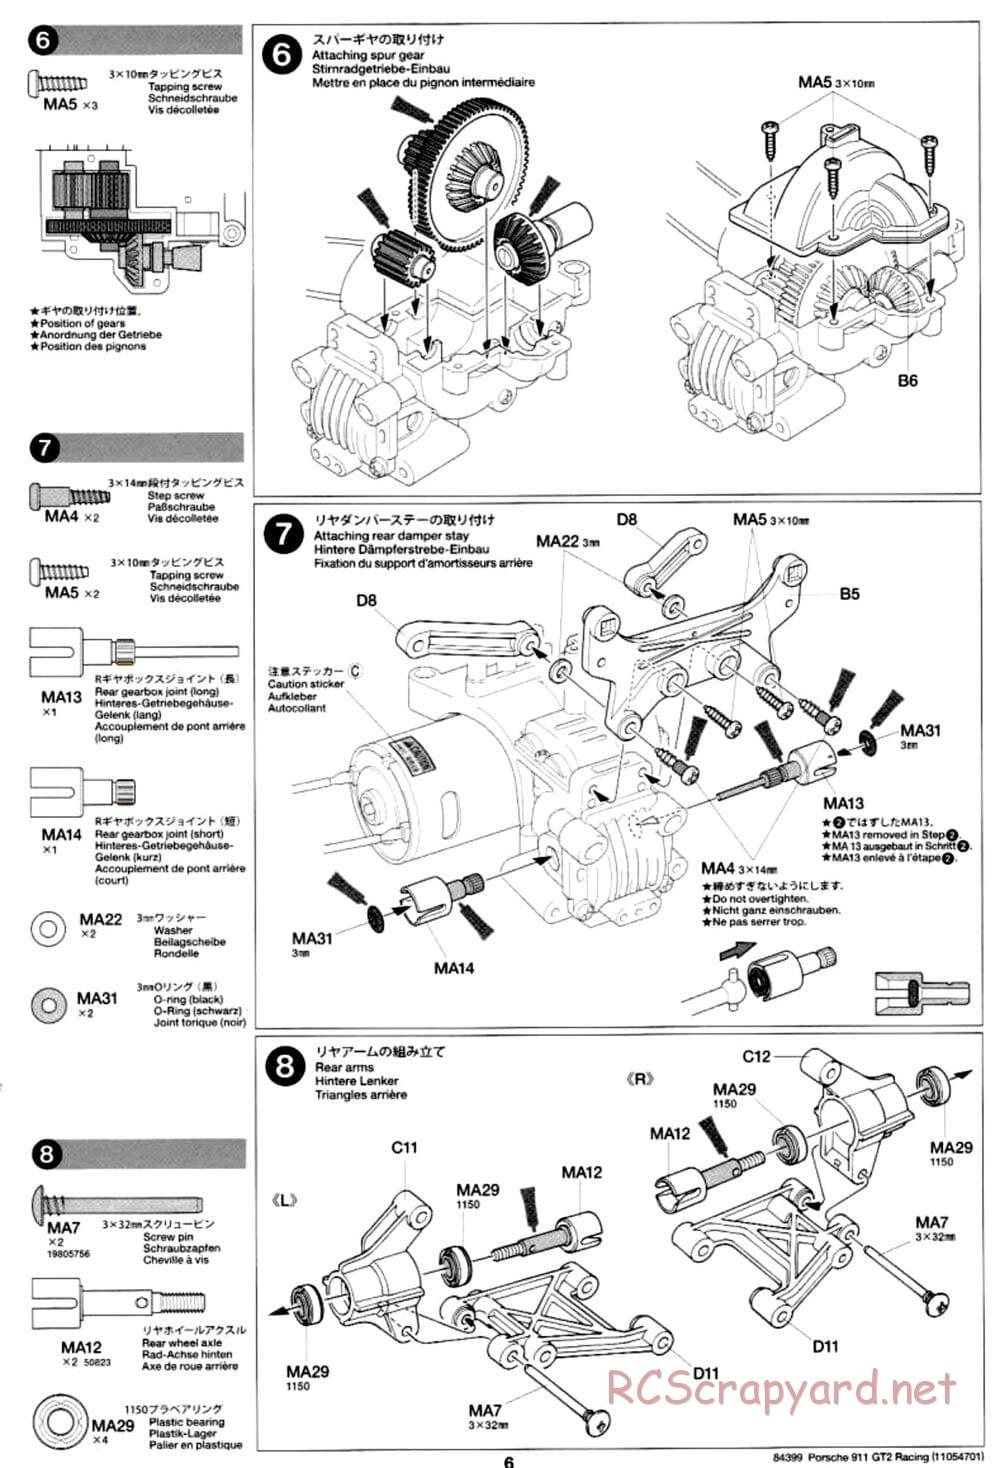 Tamiya - Porsche 911 GT2 Racing - TA02SW Chassis - Manual - Page 6